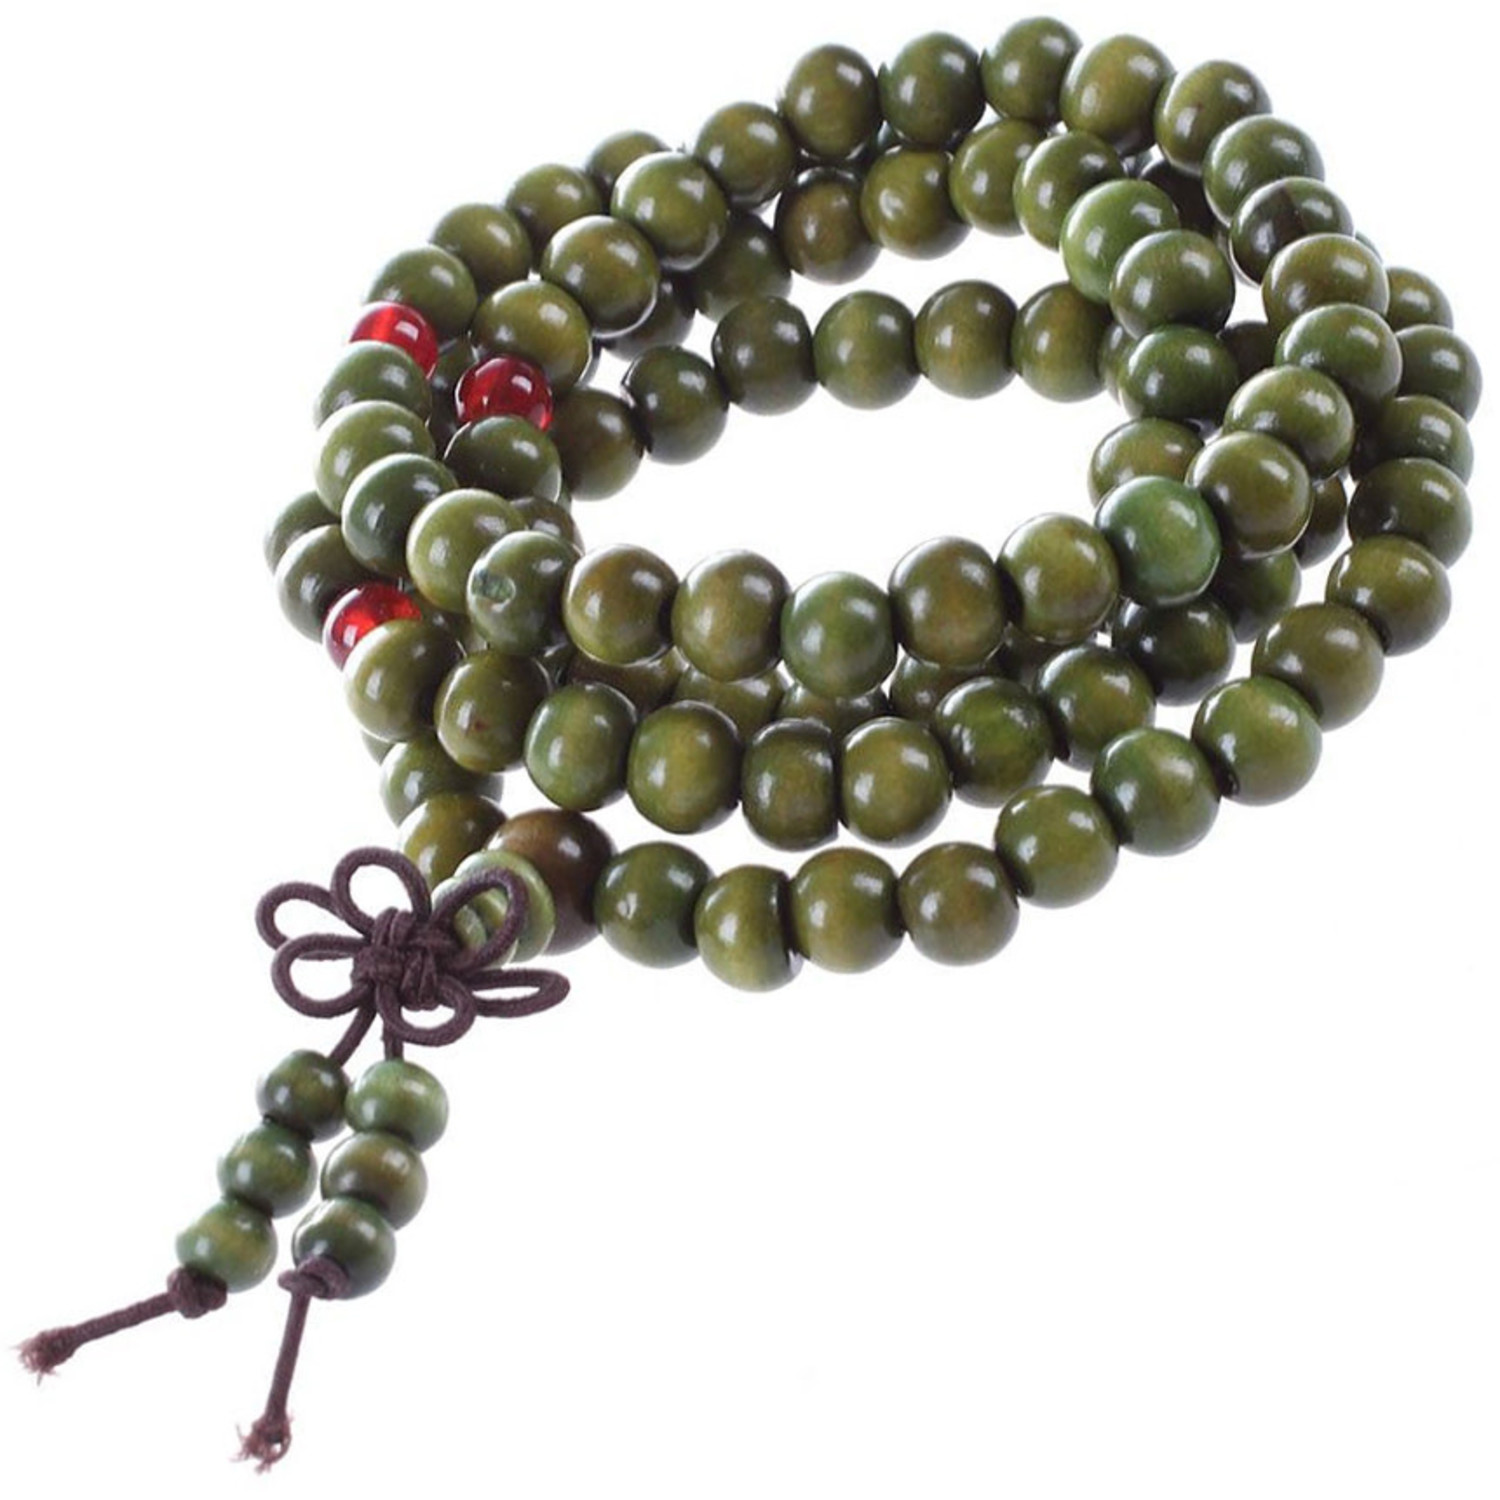 Green Buddhist Mala Beads from Shaolin Temple China - Enso Martial